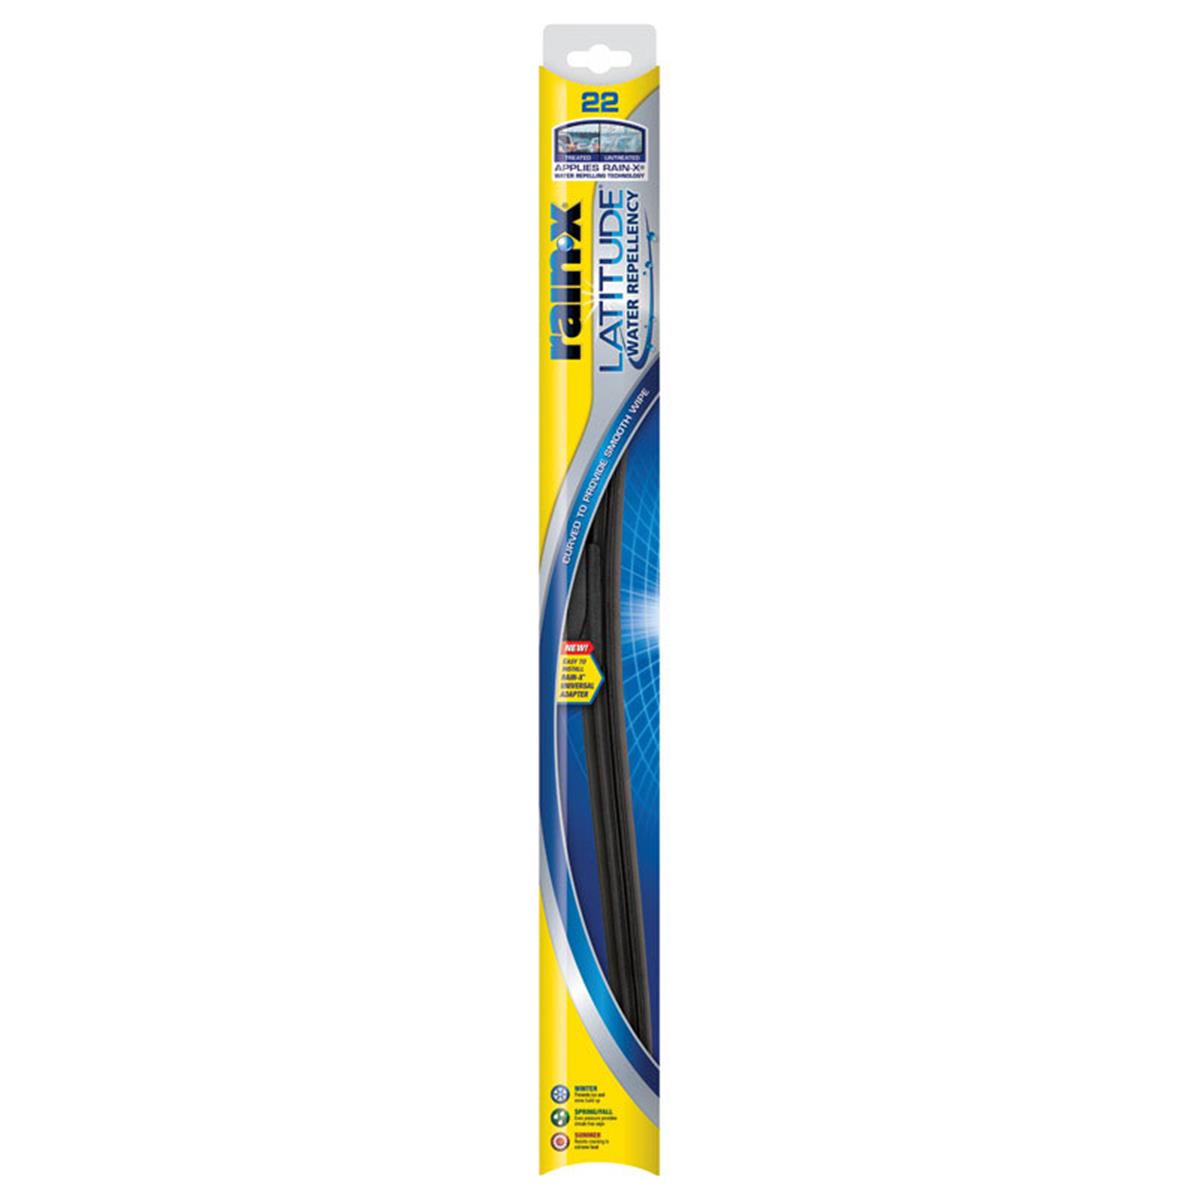 Picture of Itw Global Brands 5079279-2 22 in. Rain-X Latitude Wiper Blade